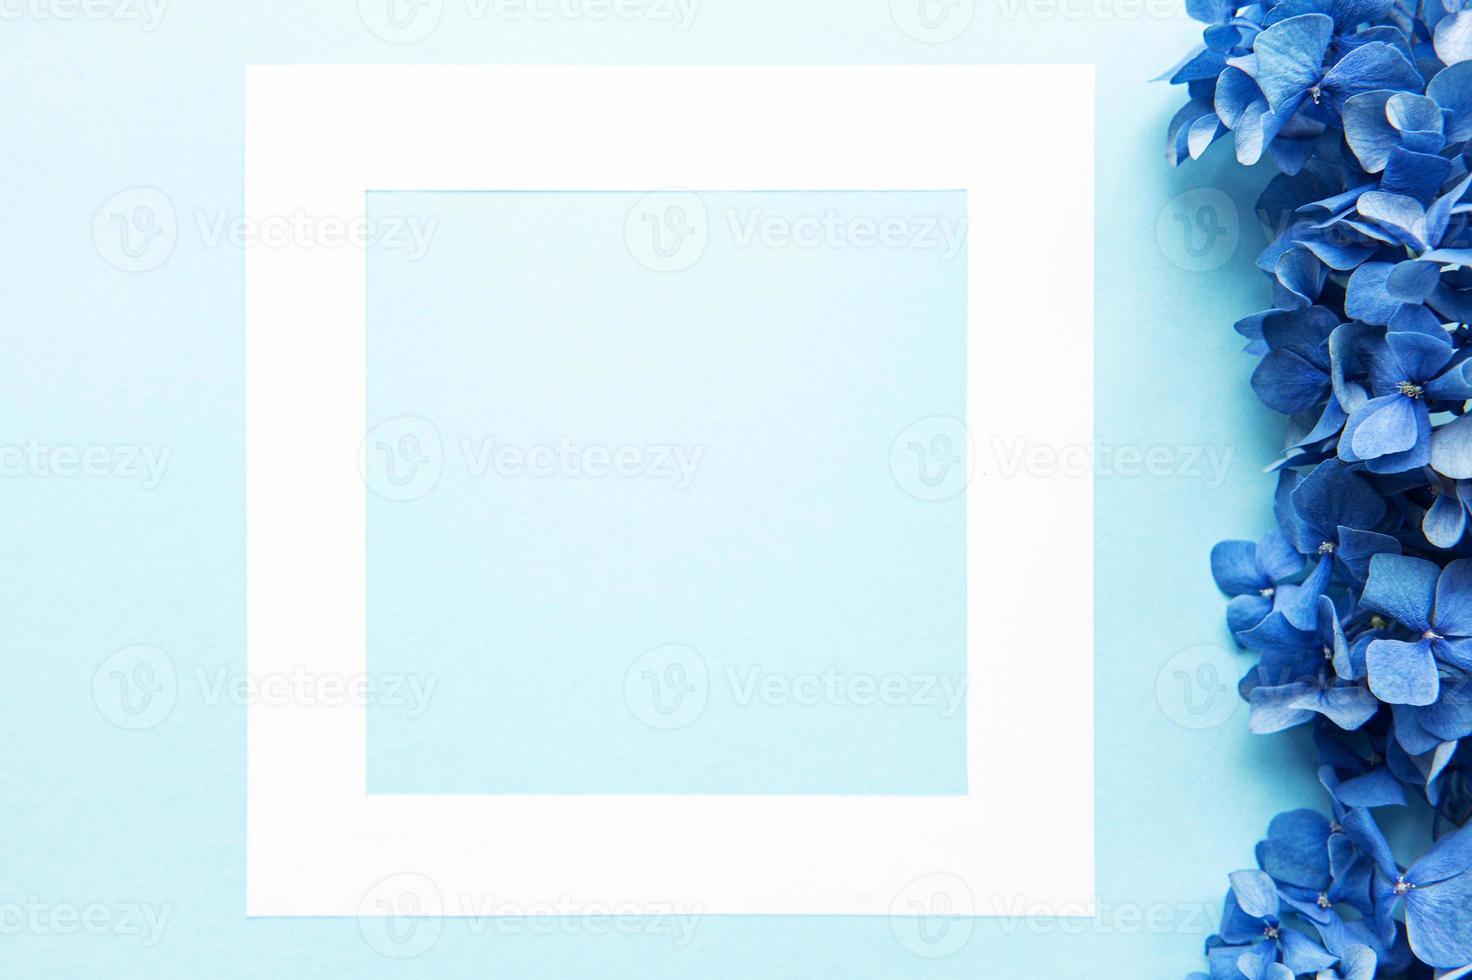 White frame and blue hydrangea flowers photo